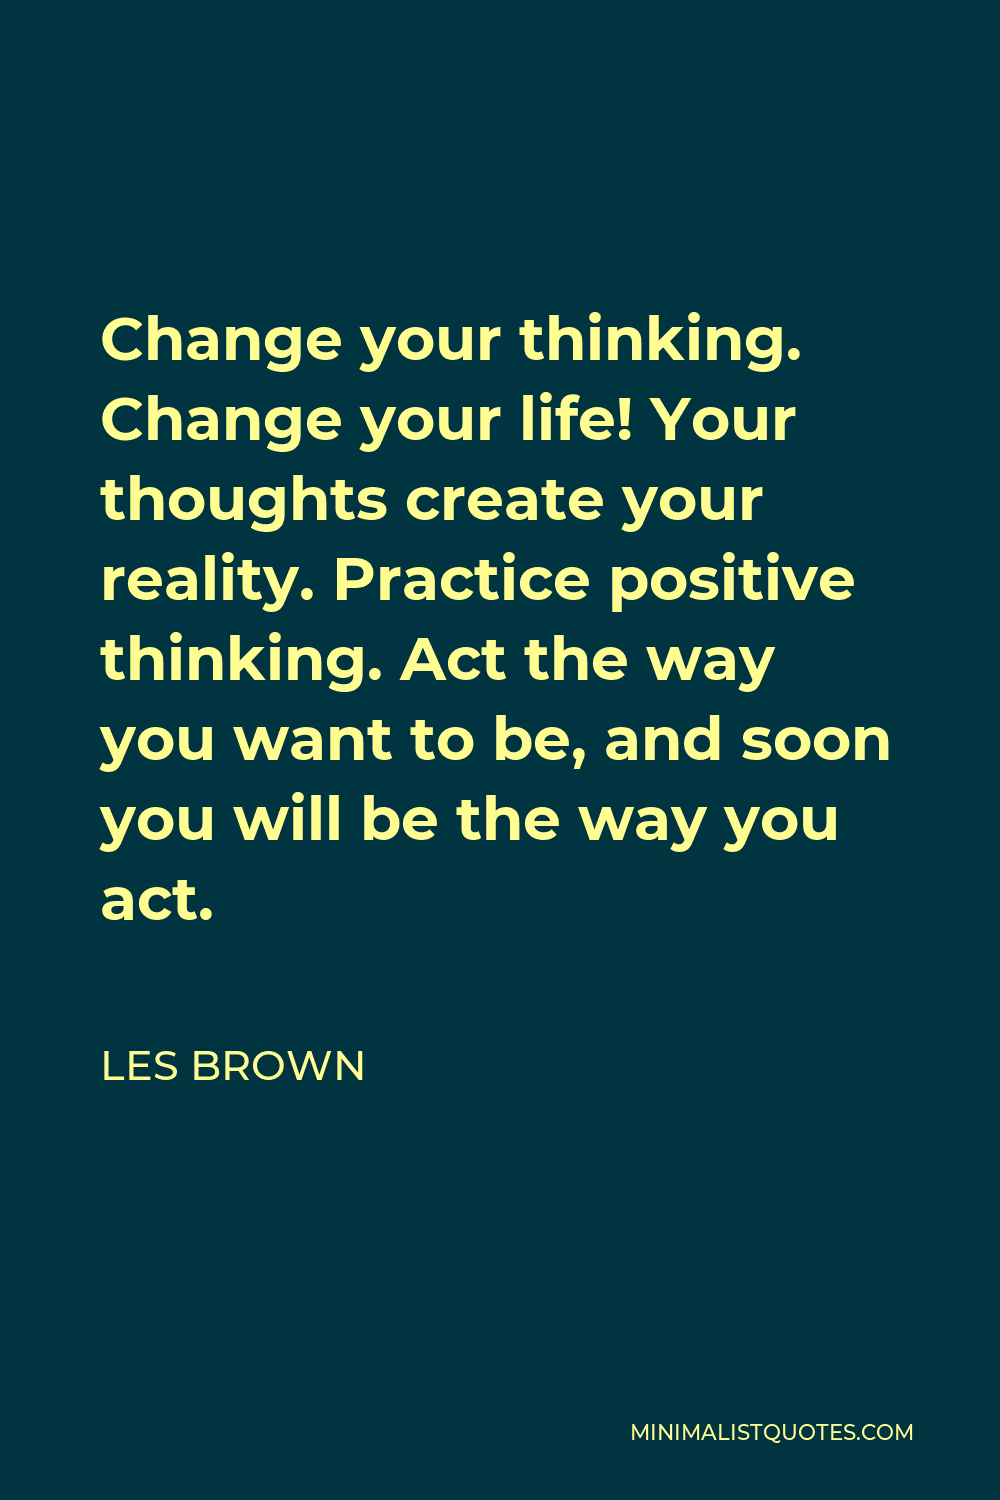 Les Brown Quote - Change your thinking. Change your life! Your thoughts create your reality. Practice positive thinking. Act the way you want to be, and soon you will be the way you act.